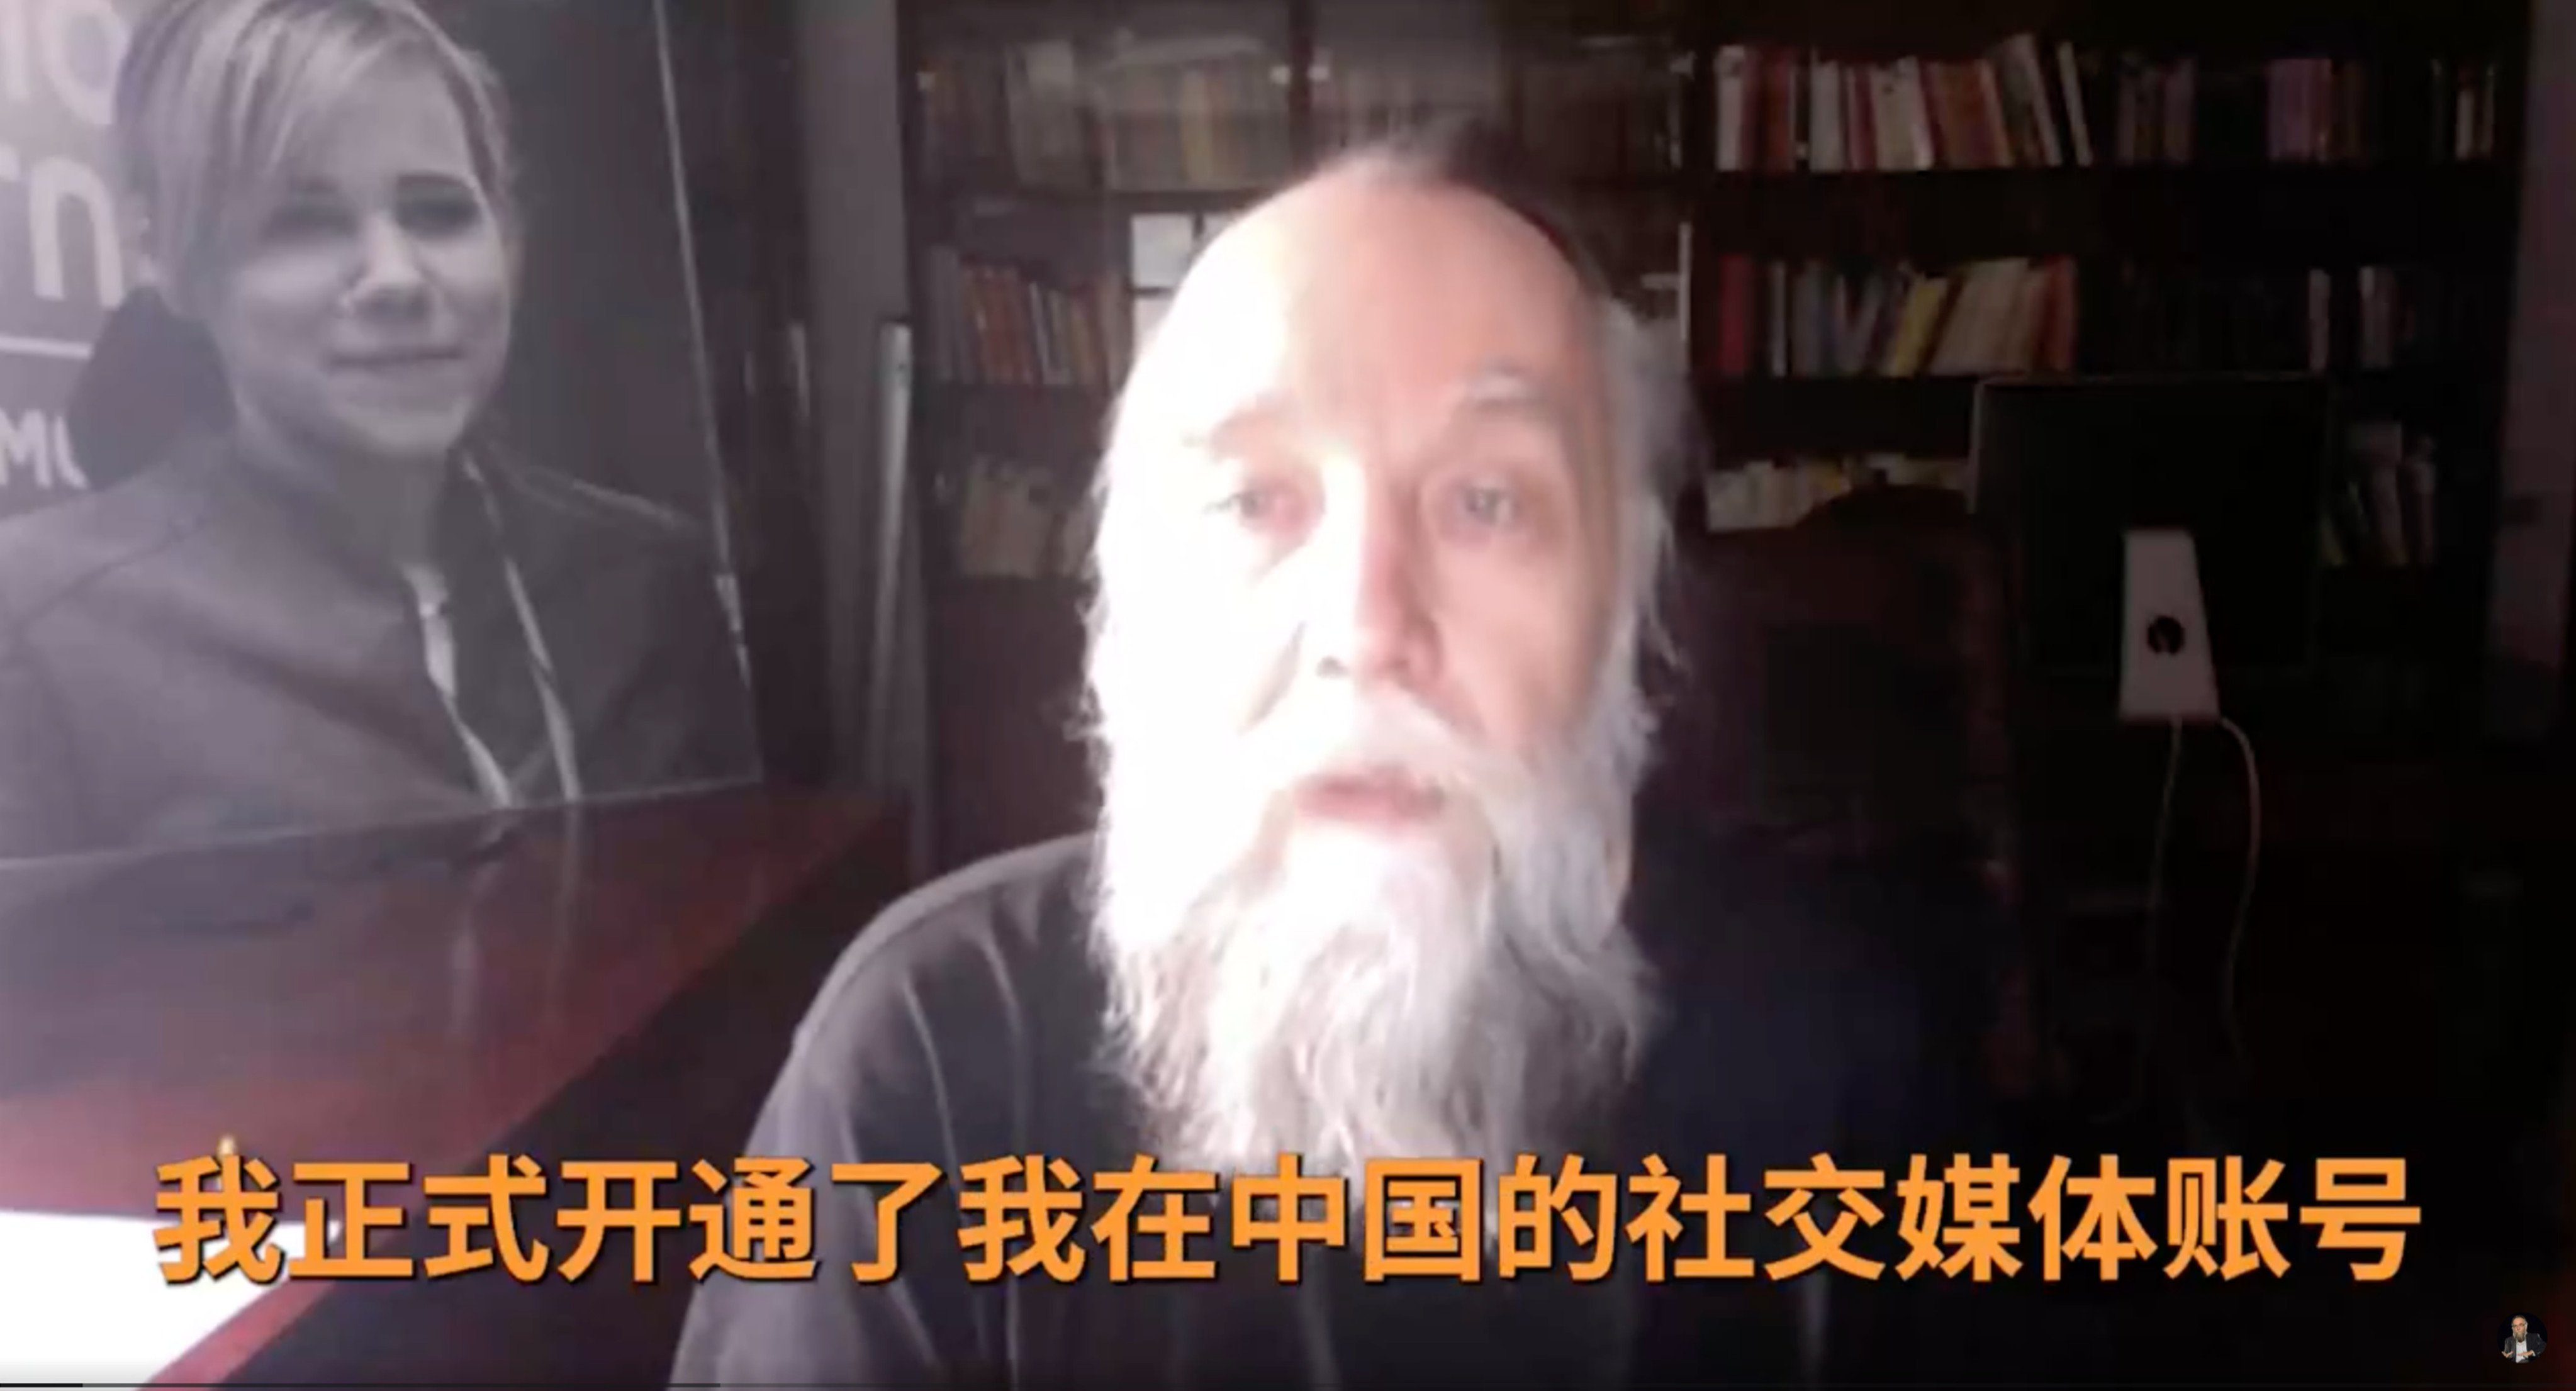 The commentator and academic posted his first video on Weibo this week. Photo: Weibo/ 亚历山大杜金